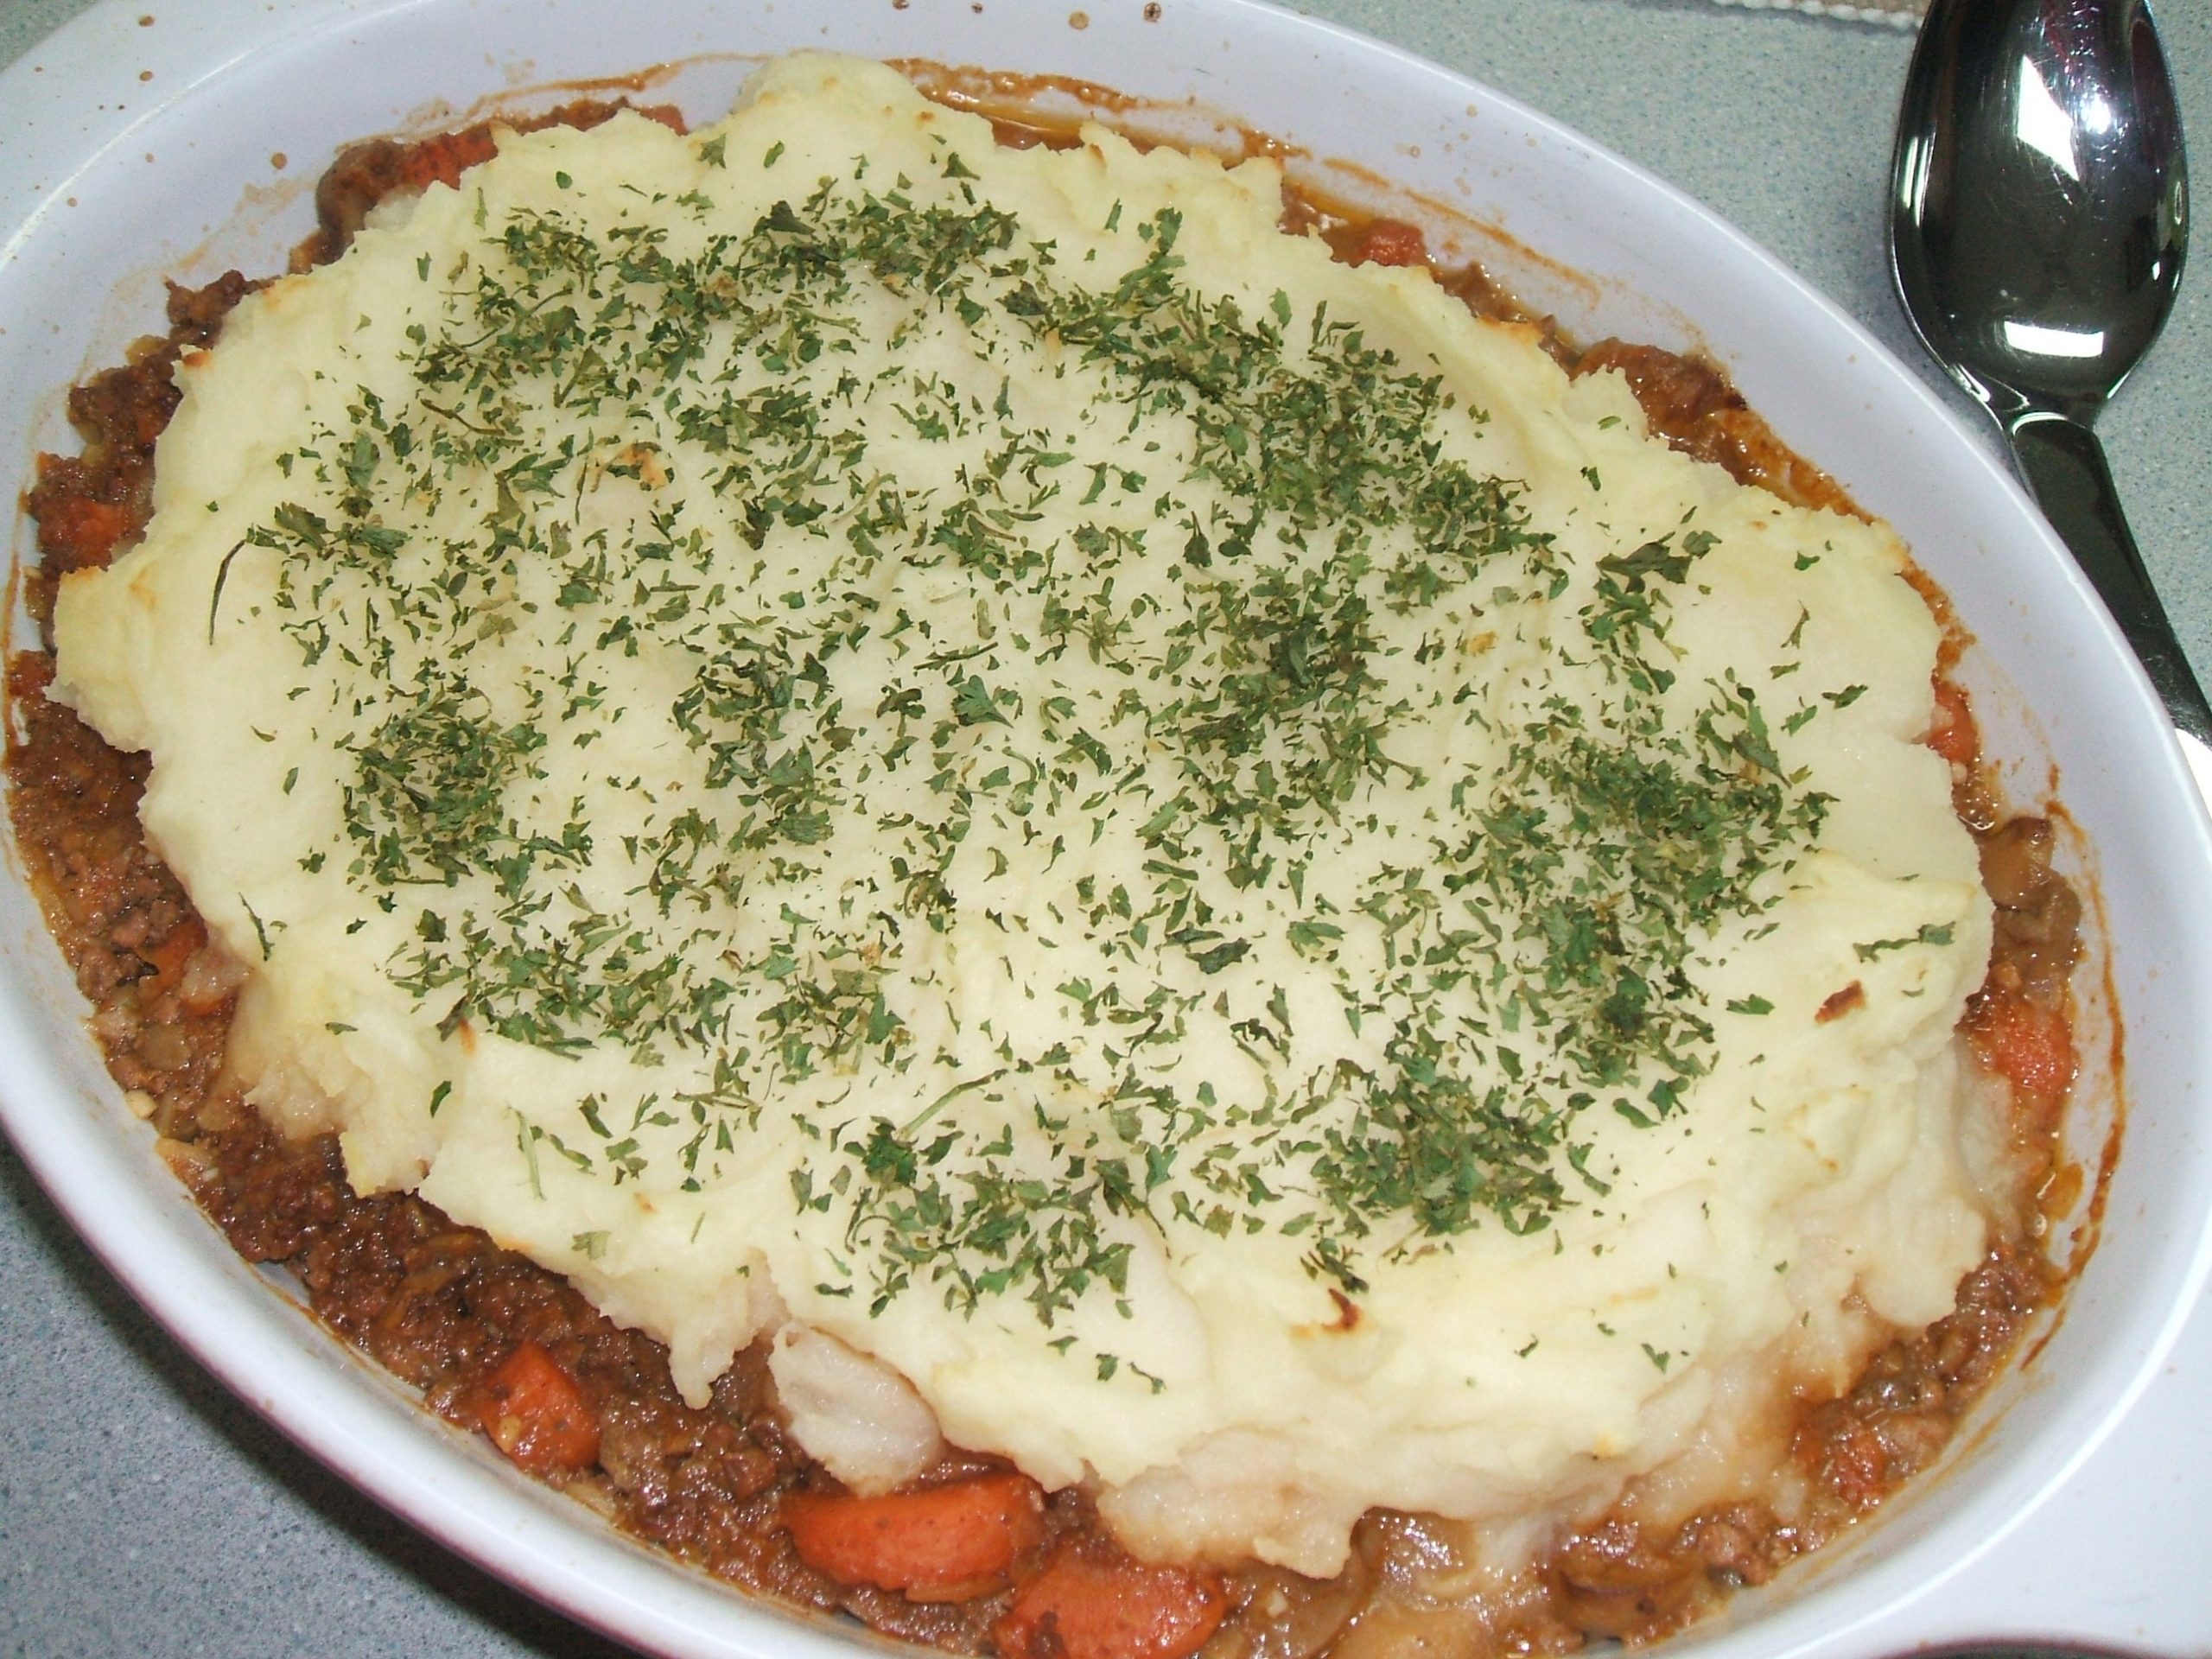 Cottage Pie baked in an oval casserole dish